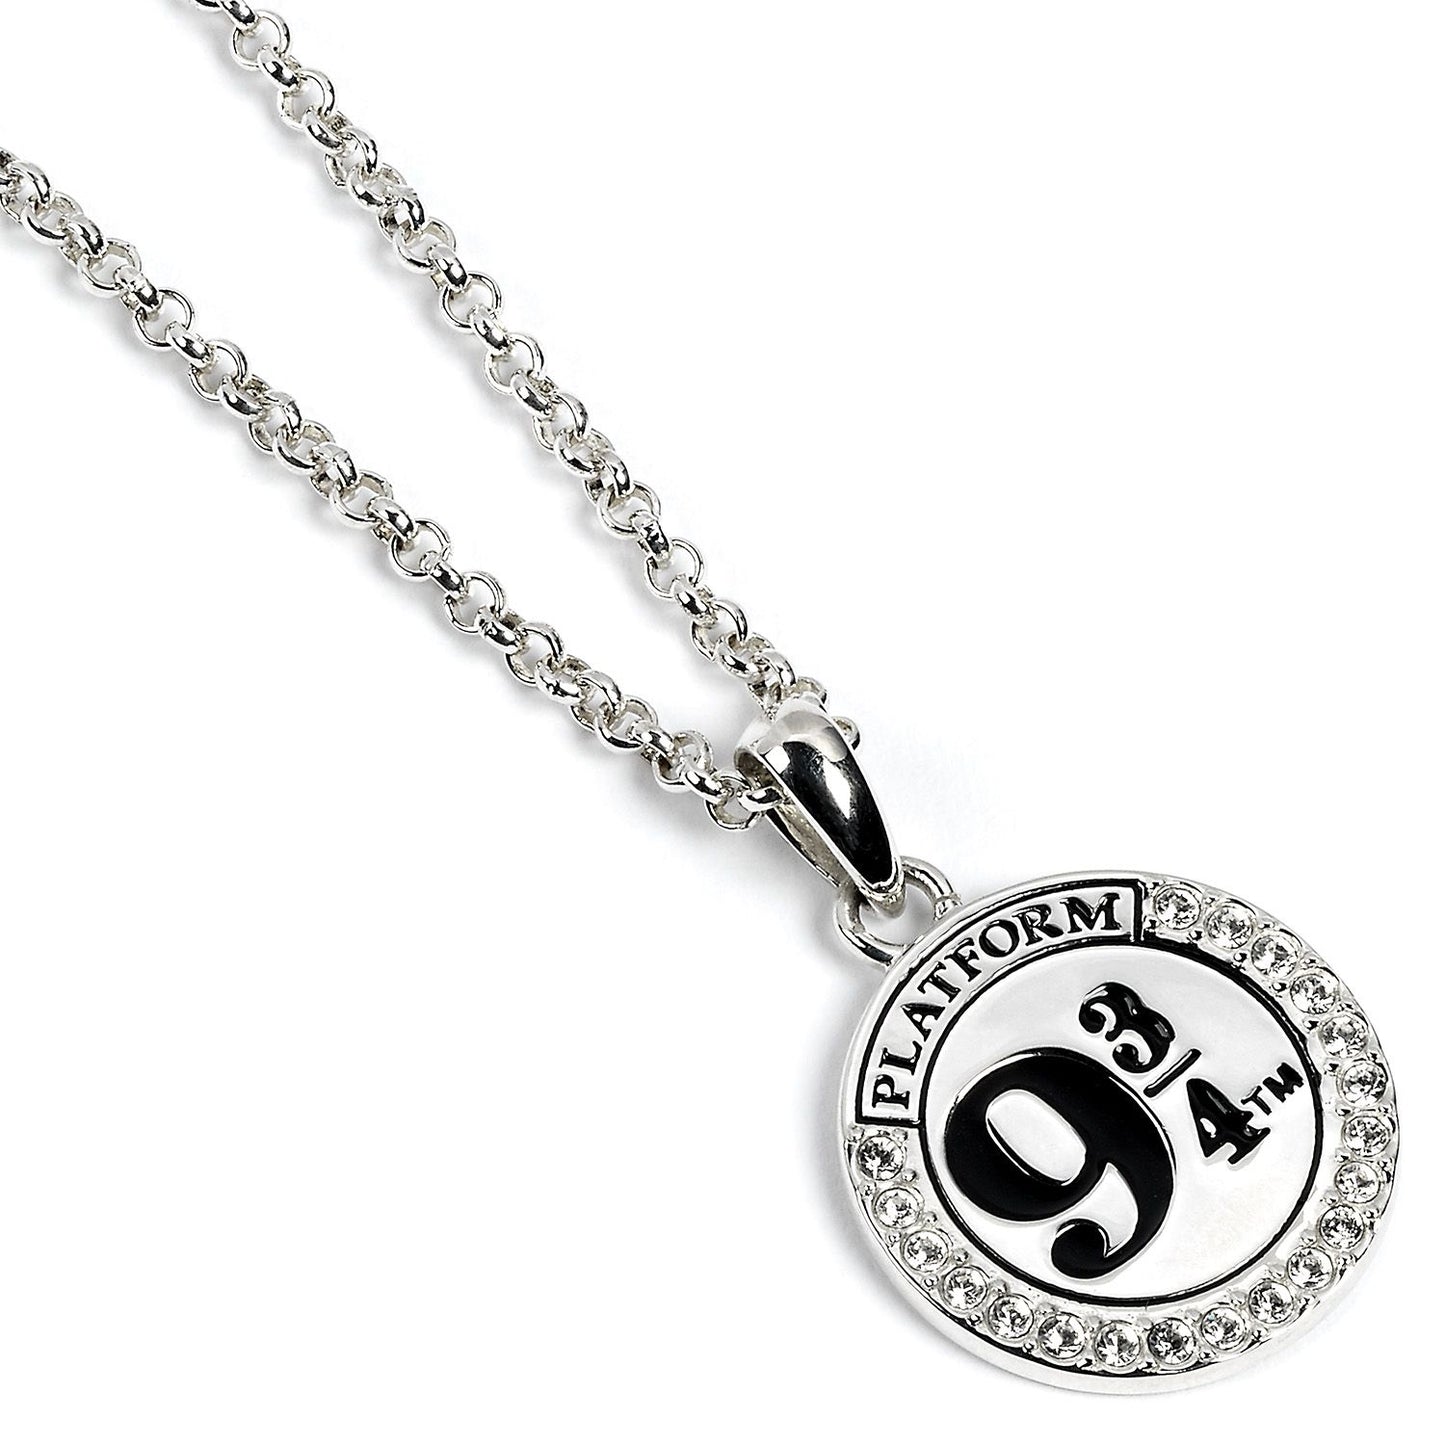 Our Harry Potter Platform 9 3/4 necklace is embellished with Swarovski Crystals.  This necklace depicts the famous 9 and Three Quarters Rail Platform at Kings Cross Station, from which Hogwarts students gain access to the Hogwarts Express  This necklace arrives presented in a sleek black Harry Potter jewelry gift box, with a colorful Harry Potter printed slipcover package. 